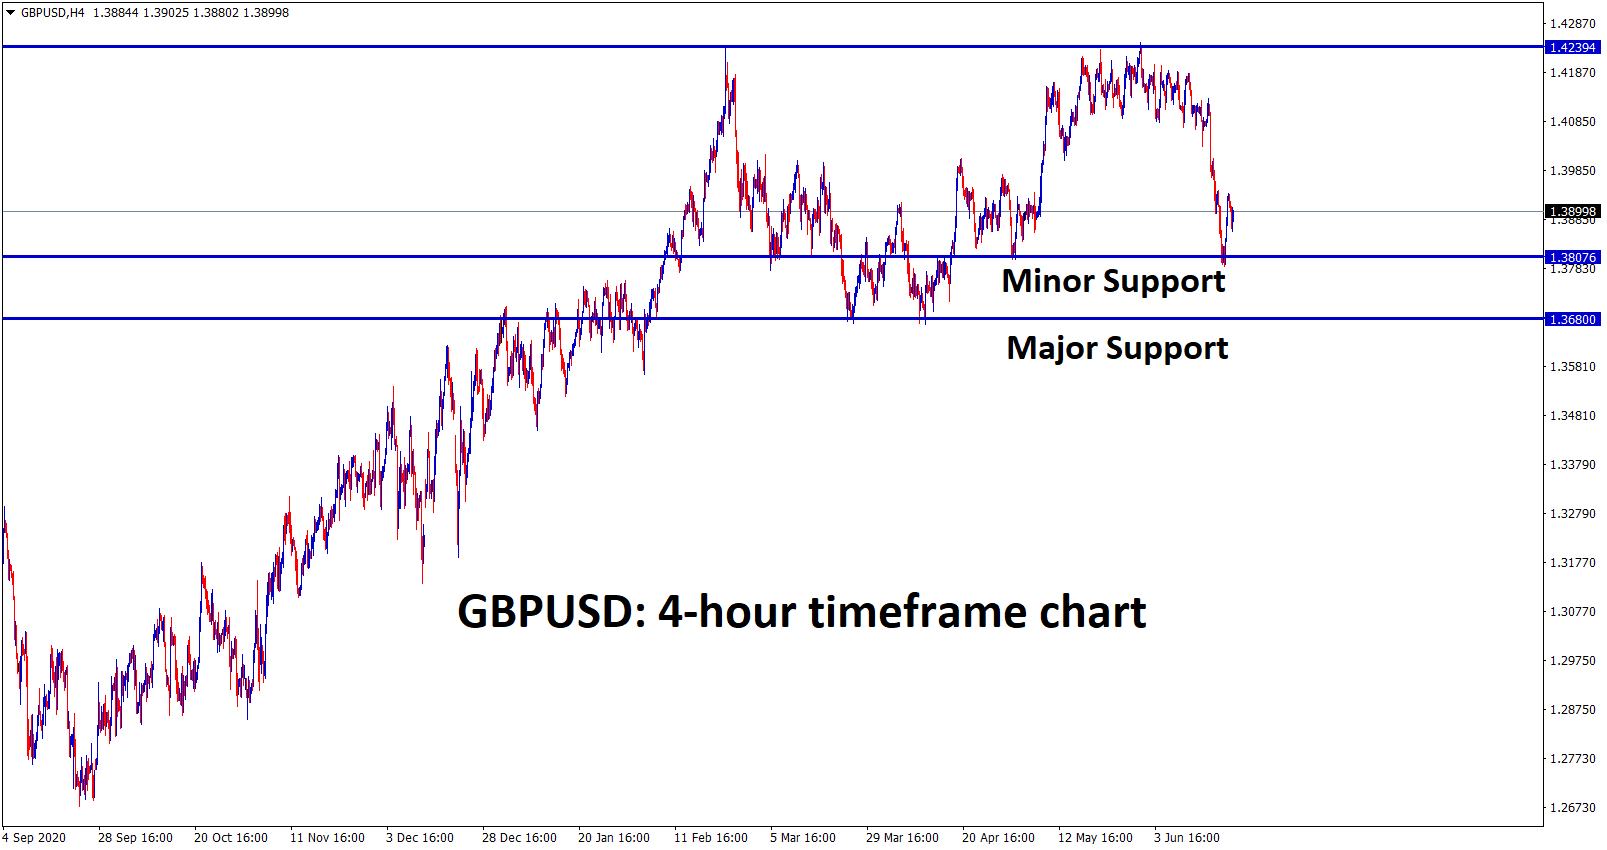 GBPUSD bounced back from the minor support